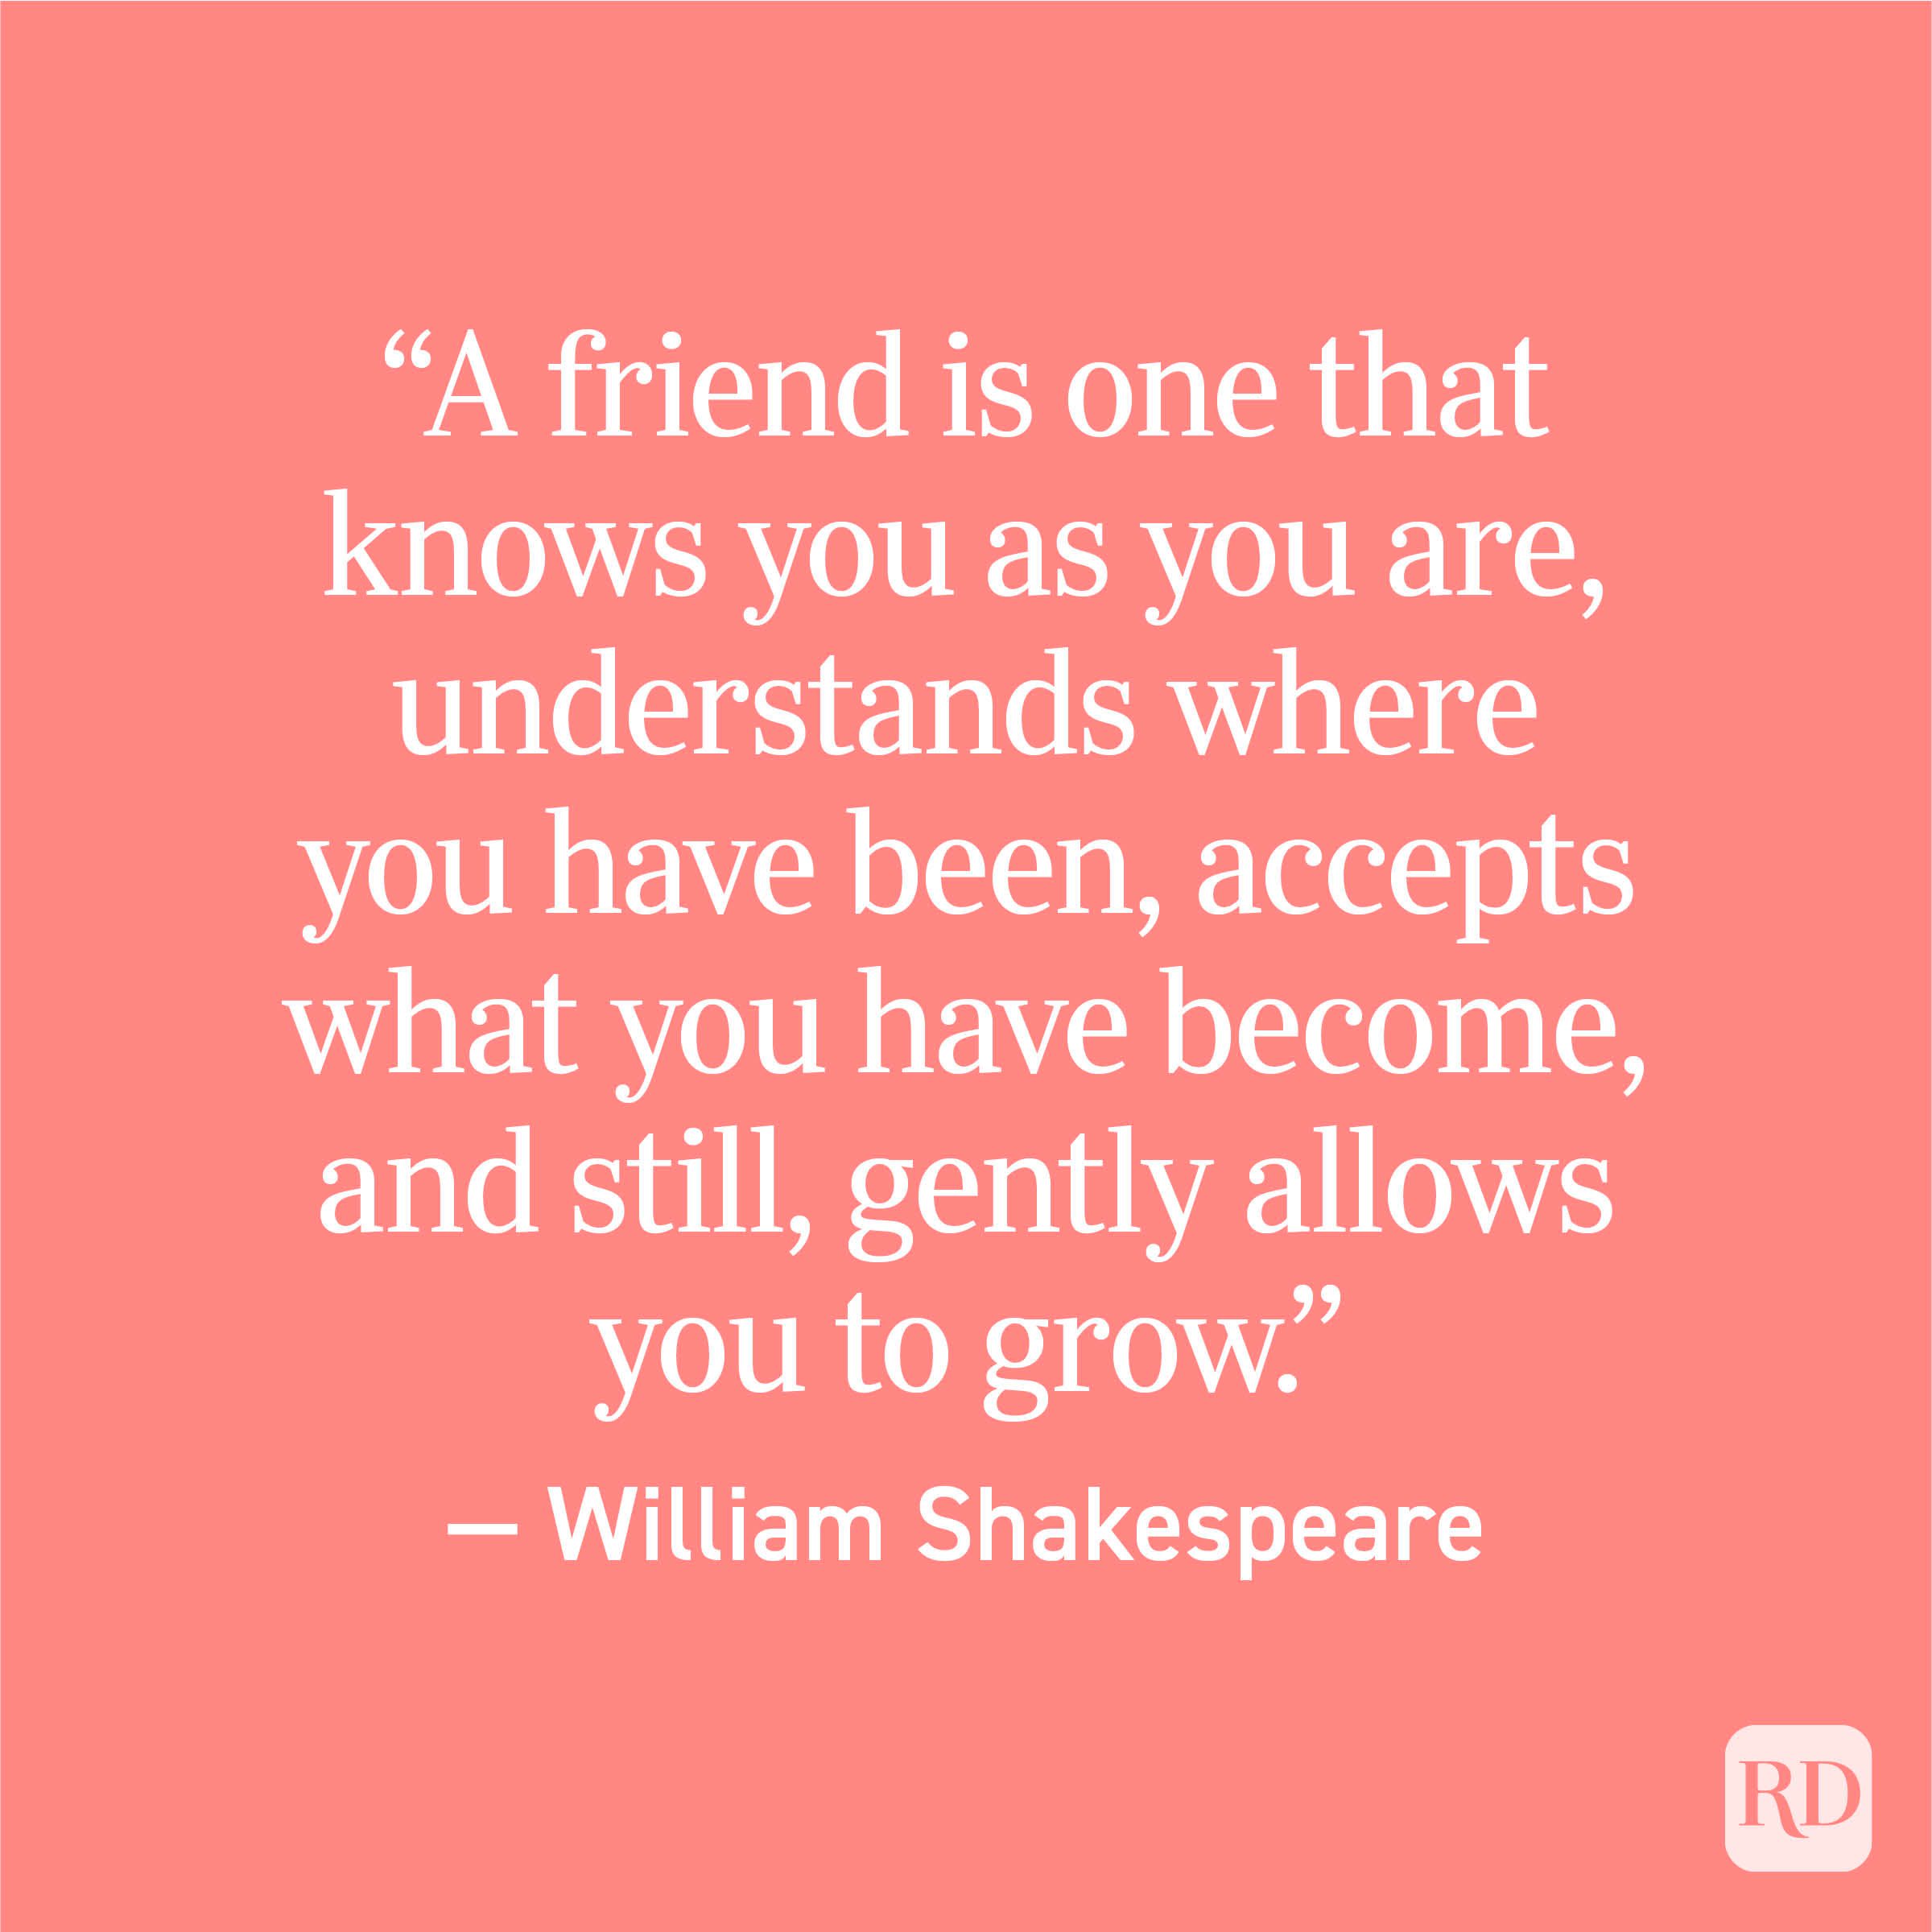 "A friend is one that knows you as you are, understands where you have been, accepts what you have become, and still, gently allows you to grow." - William Shakespeare